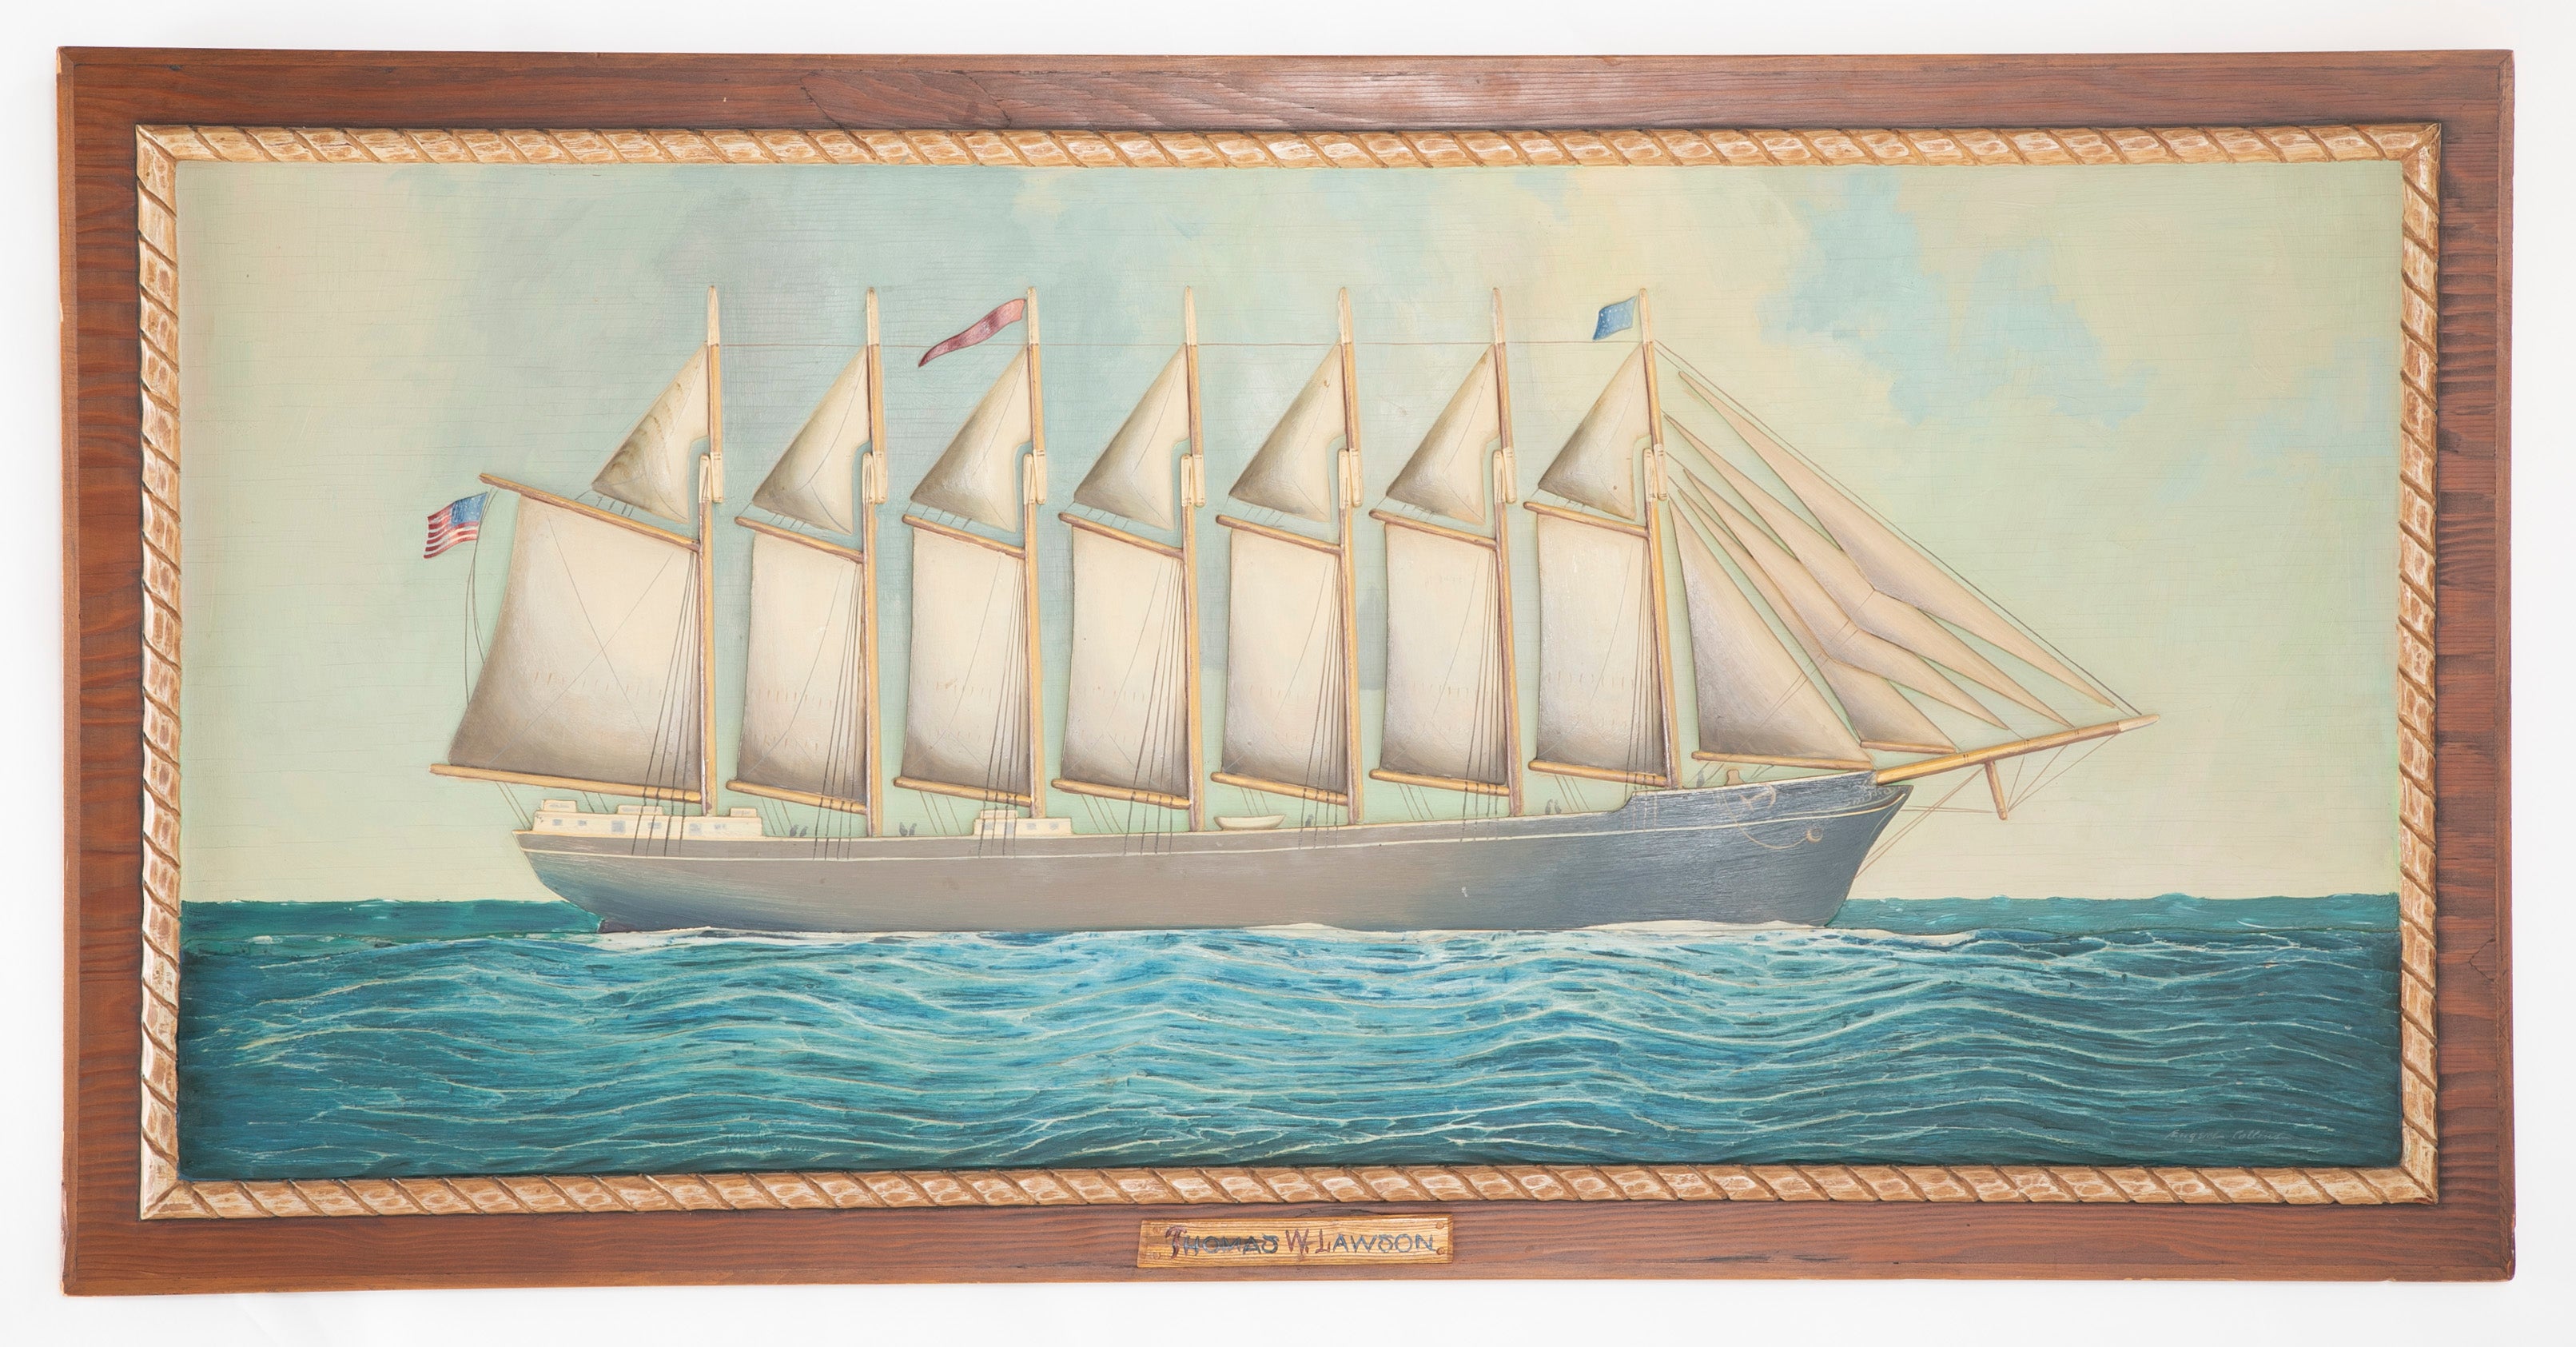 Painted Carved Bas Relief Panel of The "Thomas W. Lawson" the Only 7 Masted Ship Ever Built